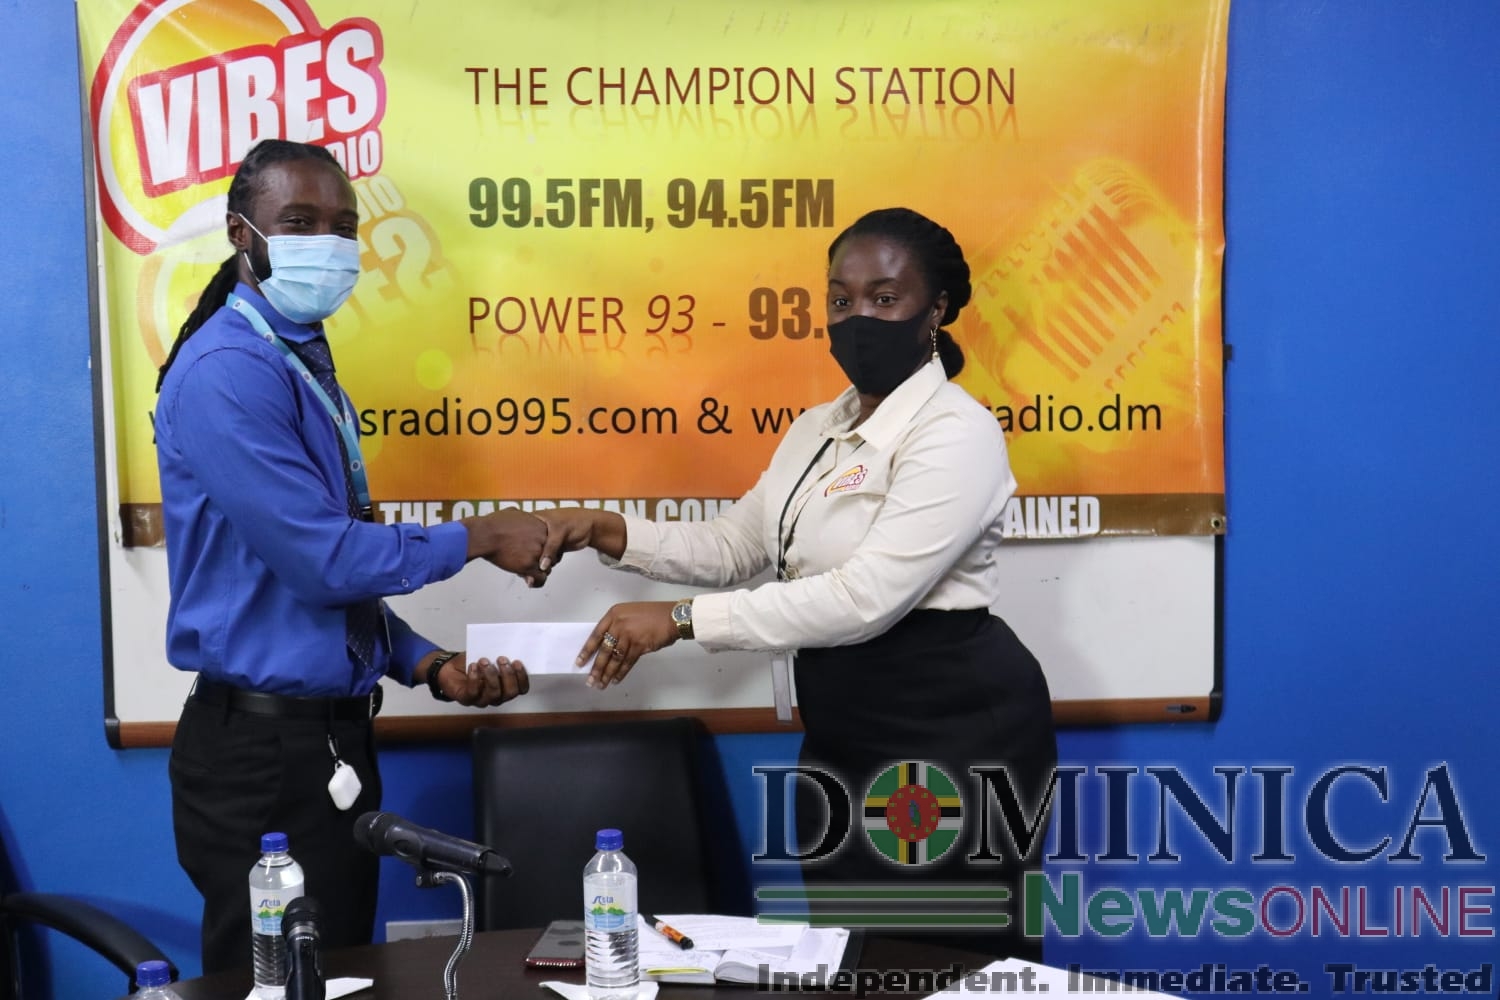 CWI and Vibes Radio agree new partnership for West Indies LIVE radio  commentary - Dominica News Online